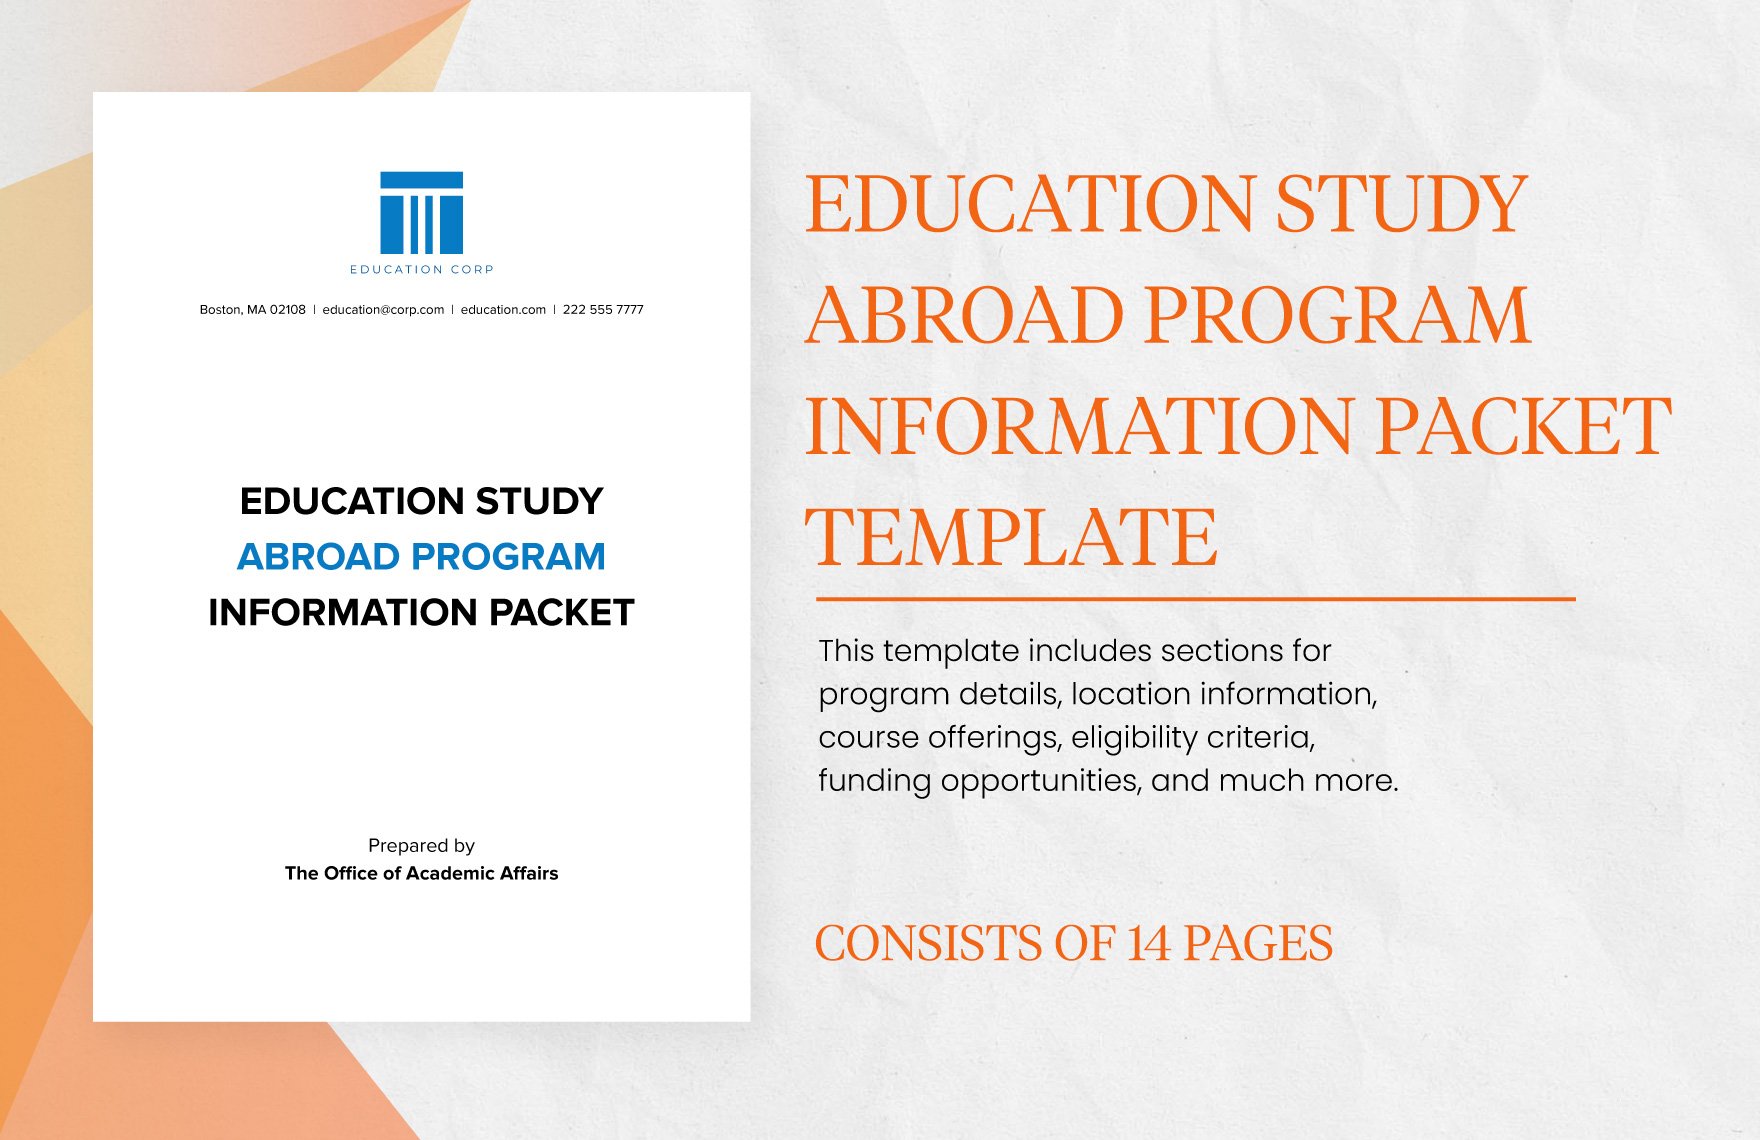 Education Study Abroad Program Information Packet Template in Word, Google Docs, PDF